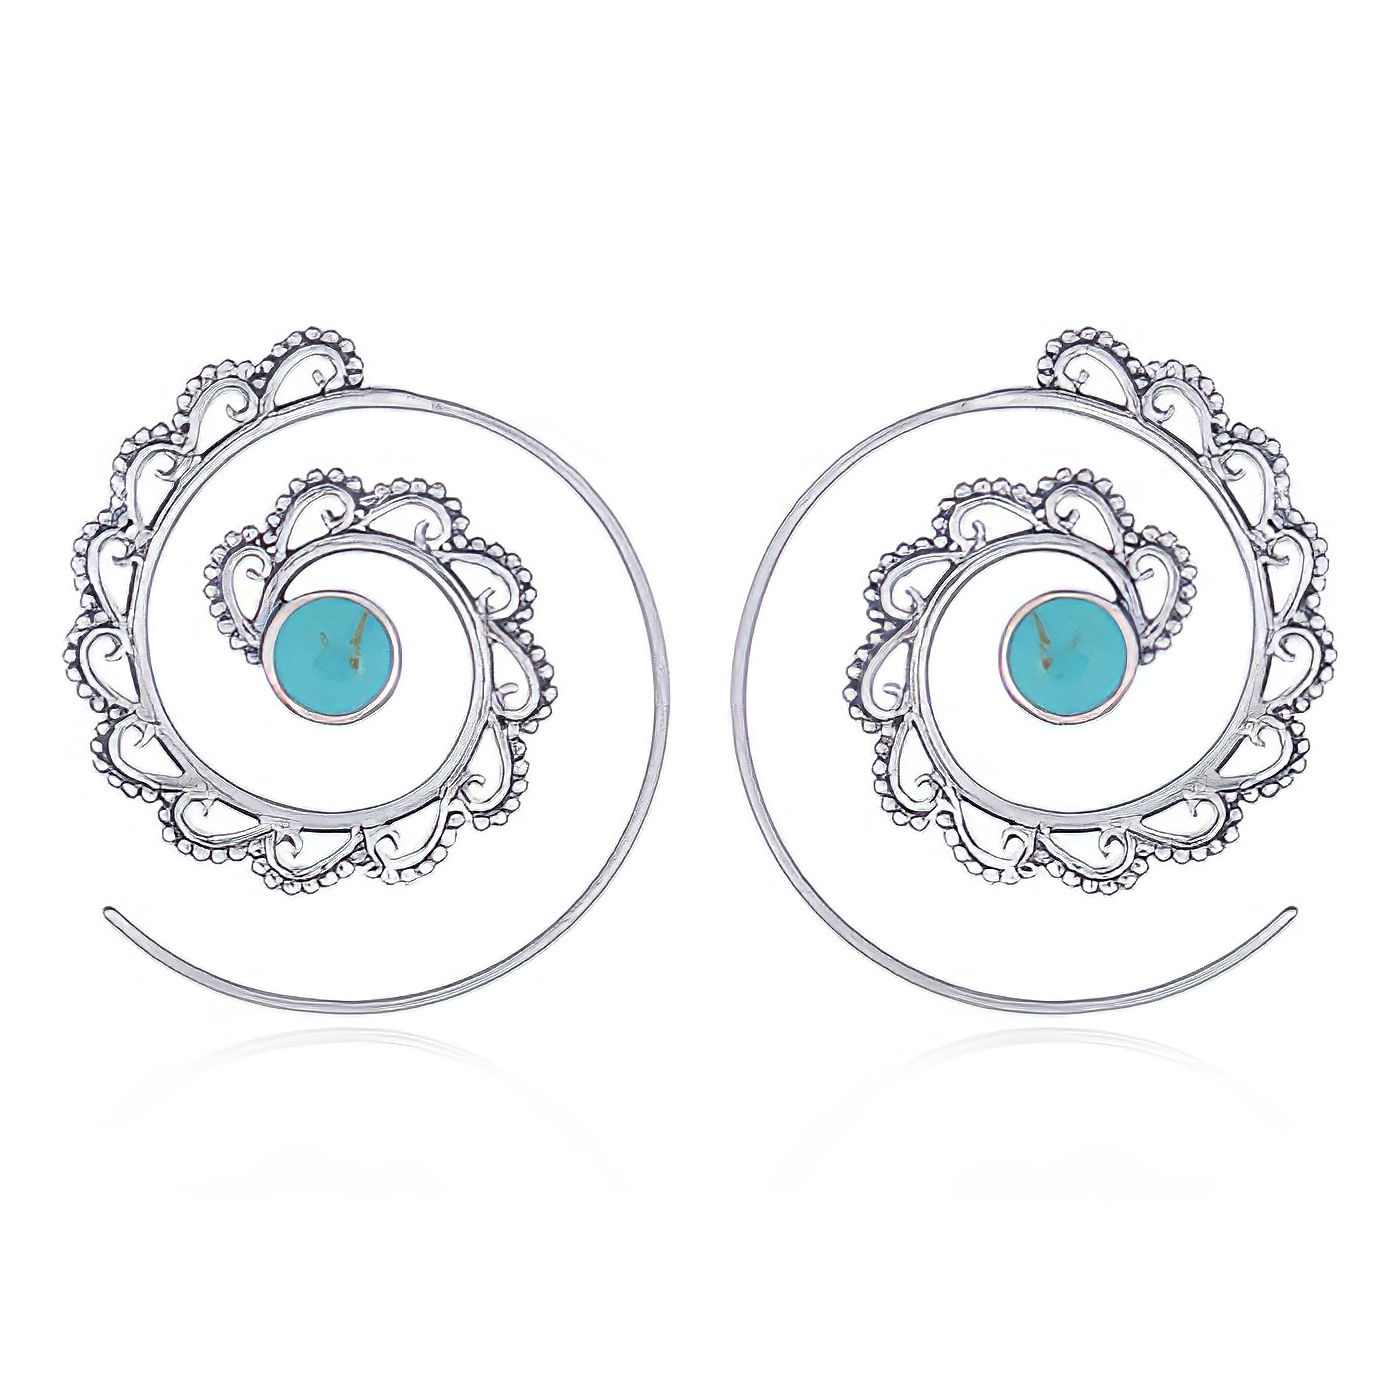 Beaded Wavy Silver Drop Earrings With Turquoise by BeYindi 